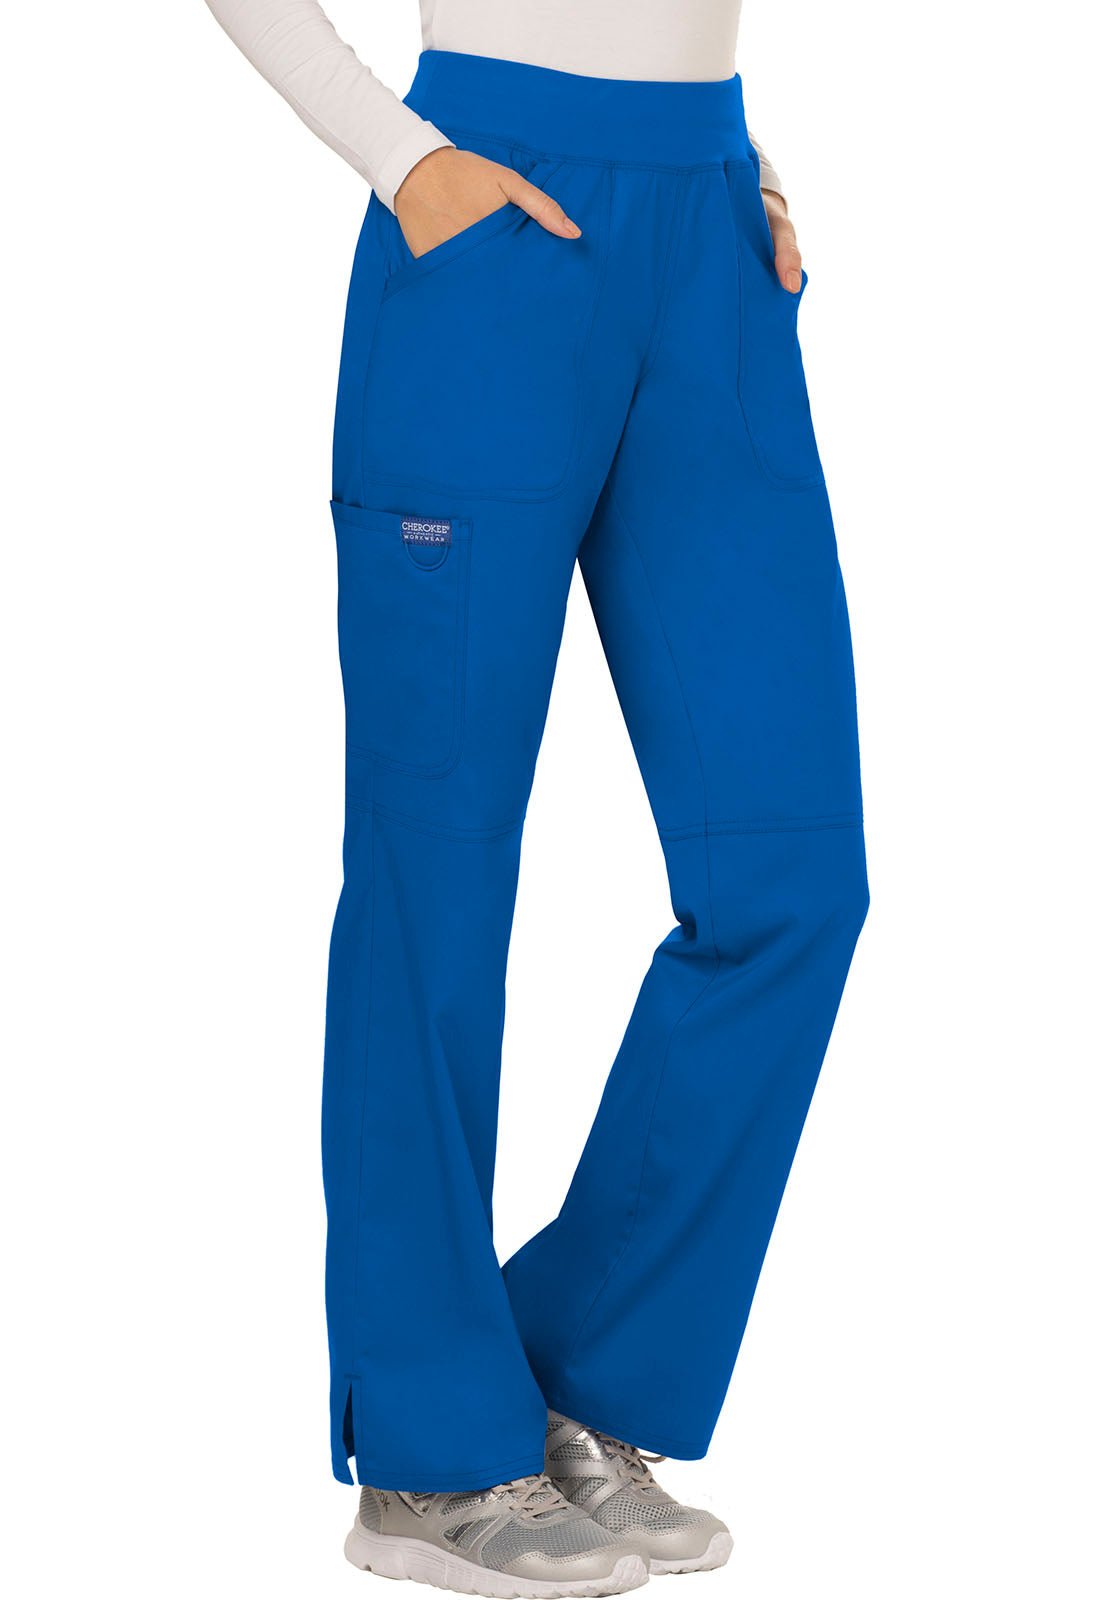 Cherokee WW Revolution Pull On Pant WW110 in Ciel, Grey, Royal, Turquoise - Scrubs Select